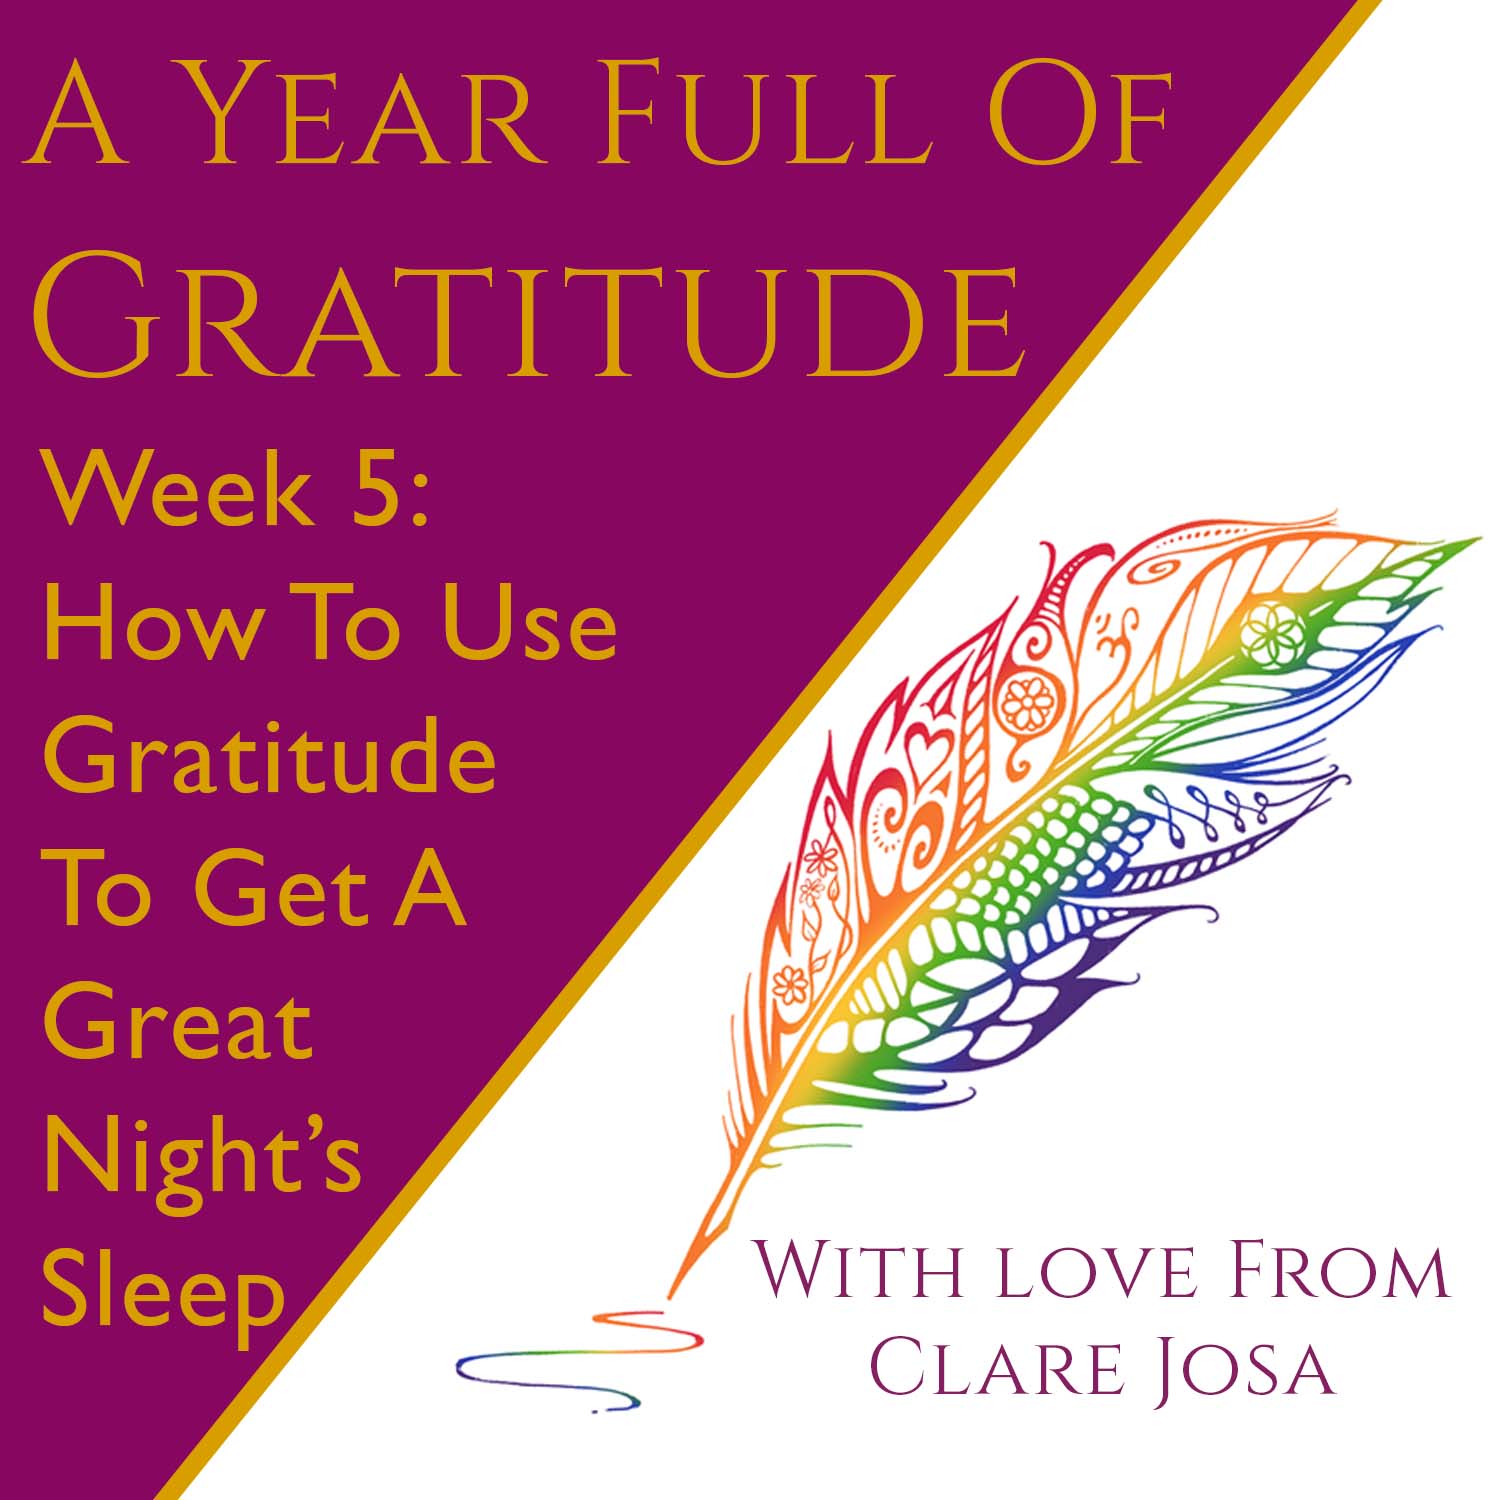 Gratitude: How to use gratitude to get a great night's sleep